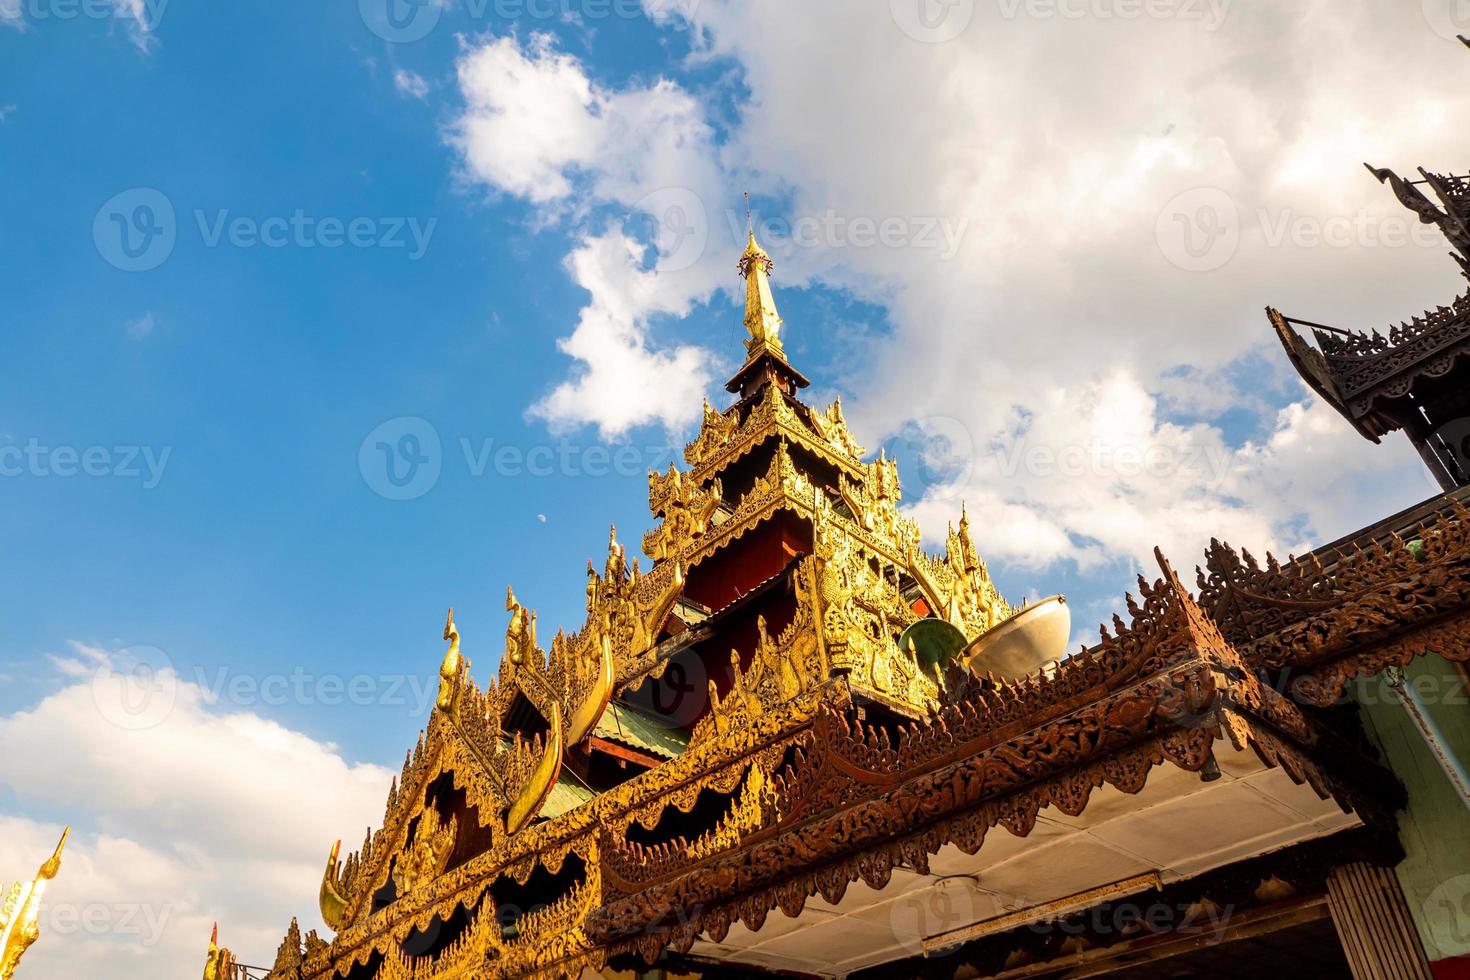 The castle mondop square hall with a pyramidal roof and the golden pagoda in the Burmese temple photo